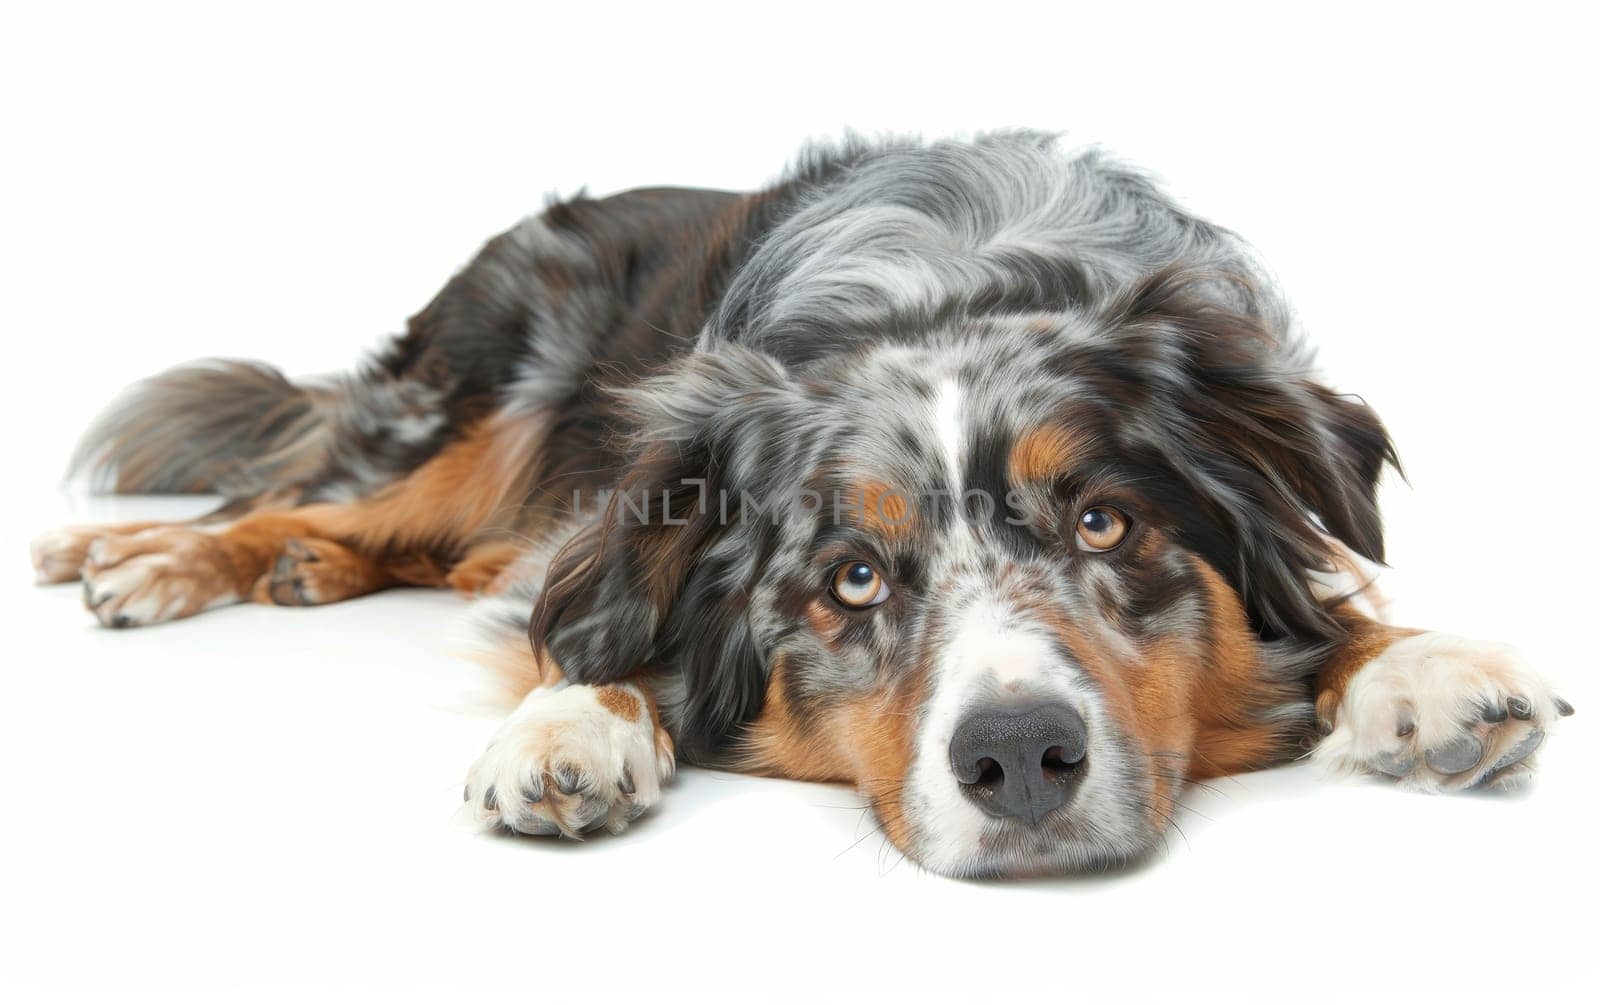 A laid-back Australian Shepherd lounges, its captivating gaze inviting interaction. The dog's merle coat pattern is rich in detail and texture. by sfinks